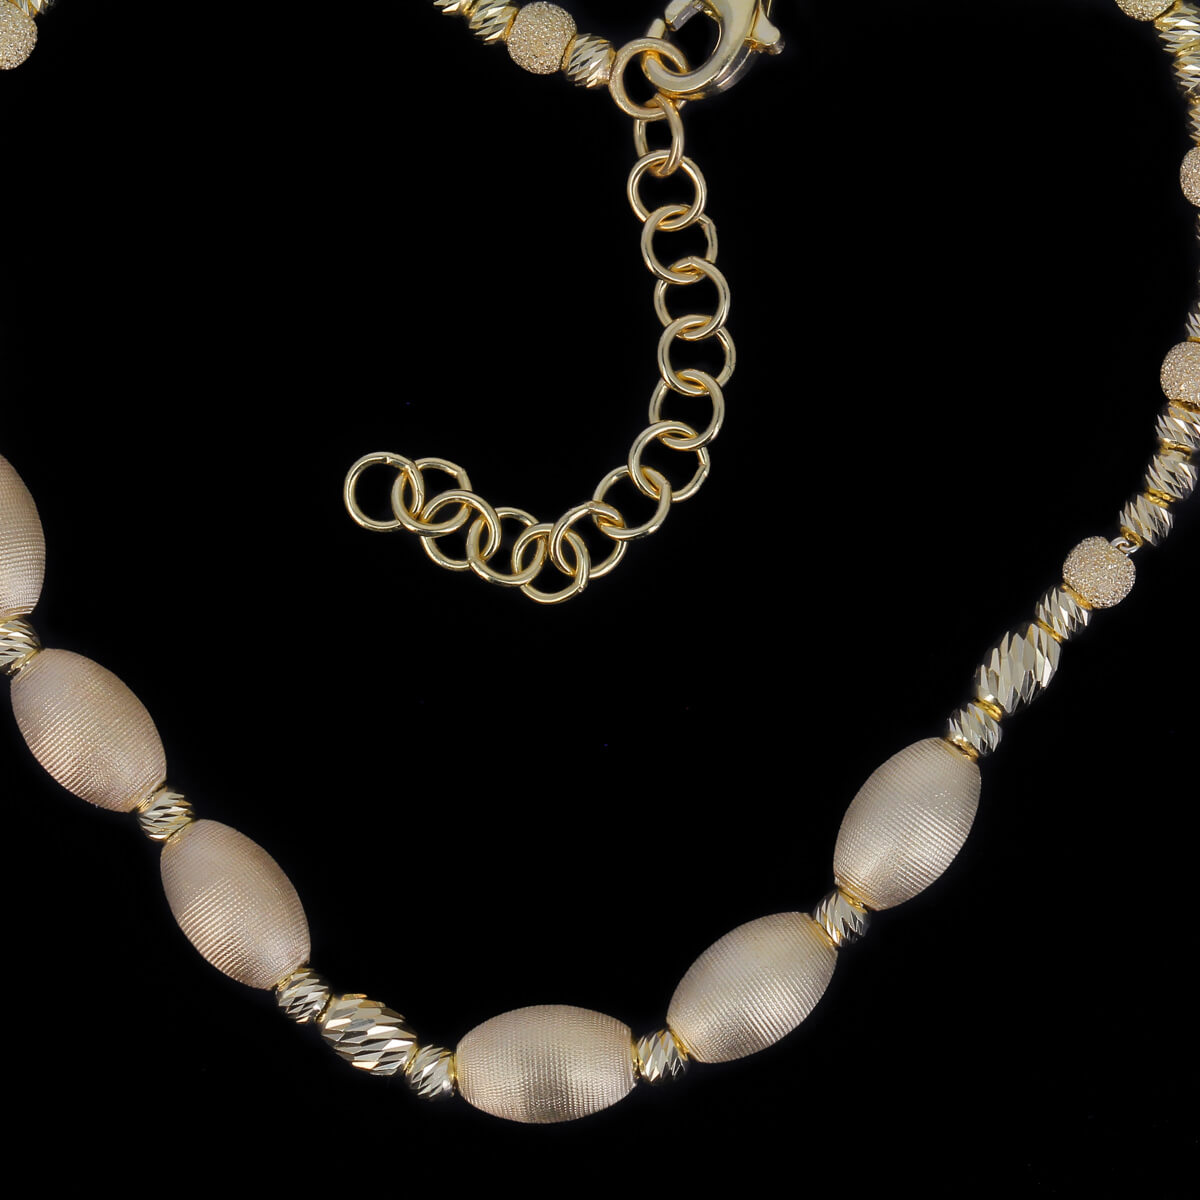 Beautiful necklace with beautiful gold plate beads